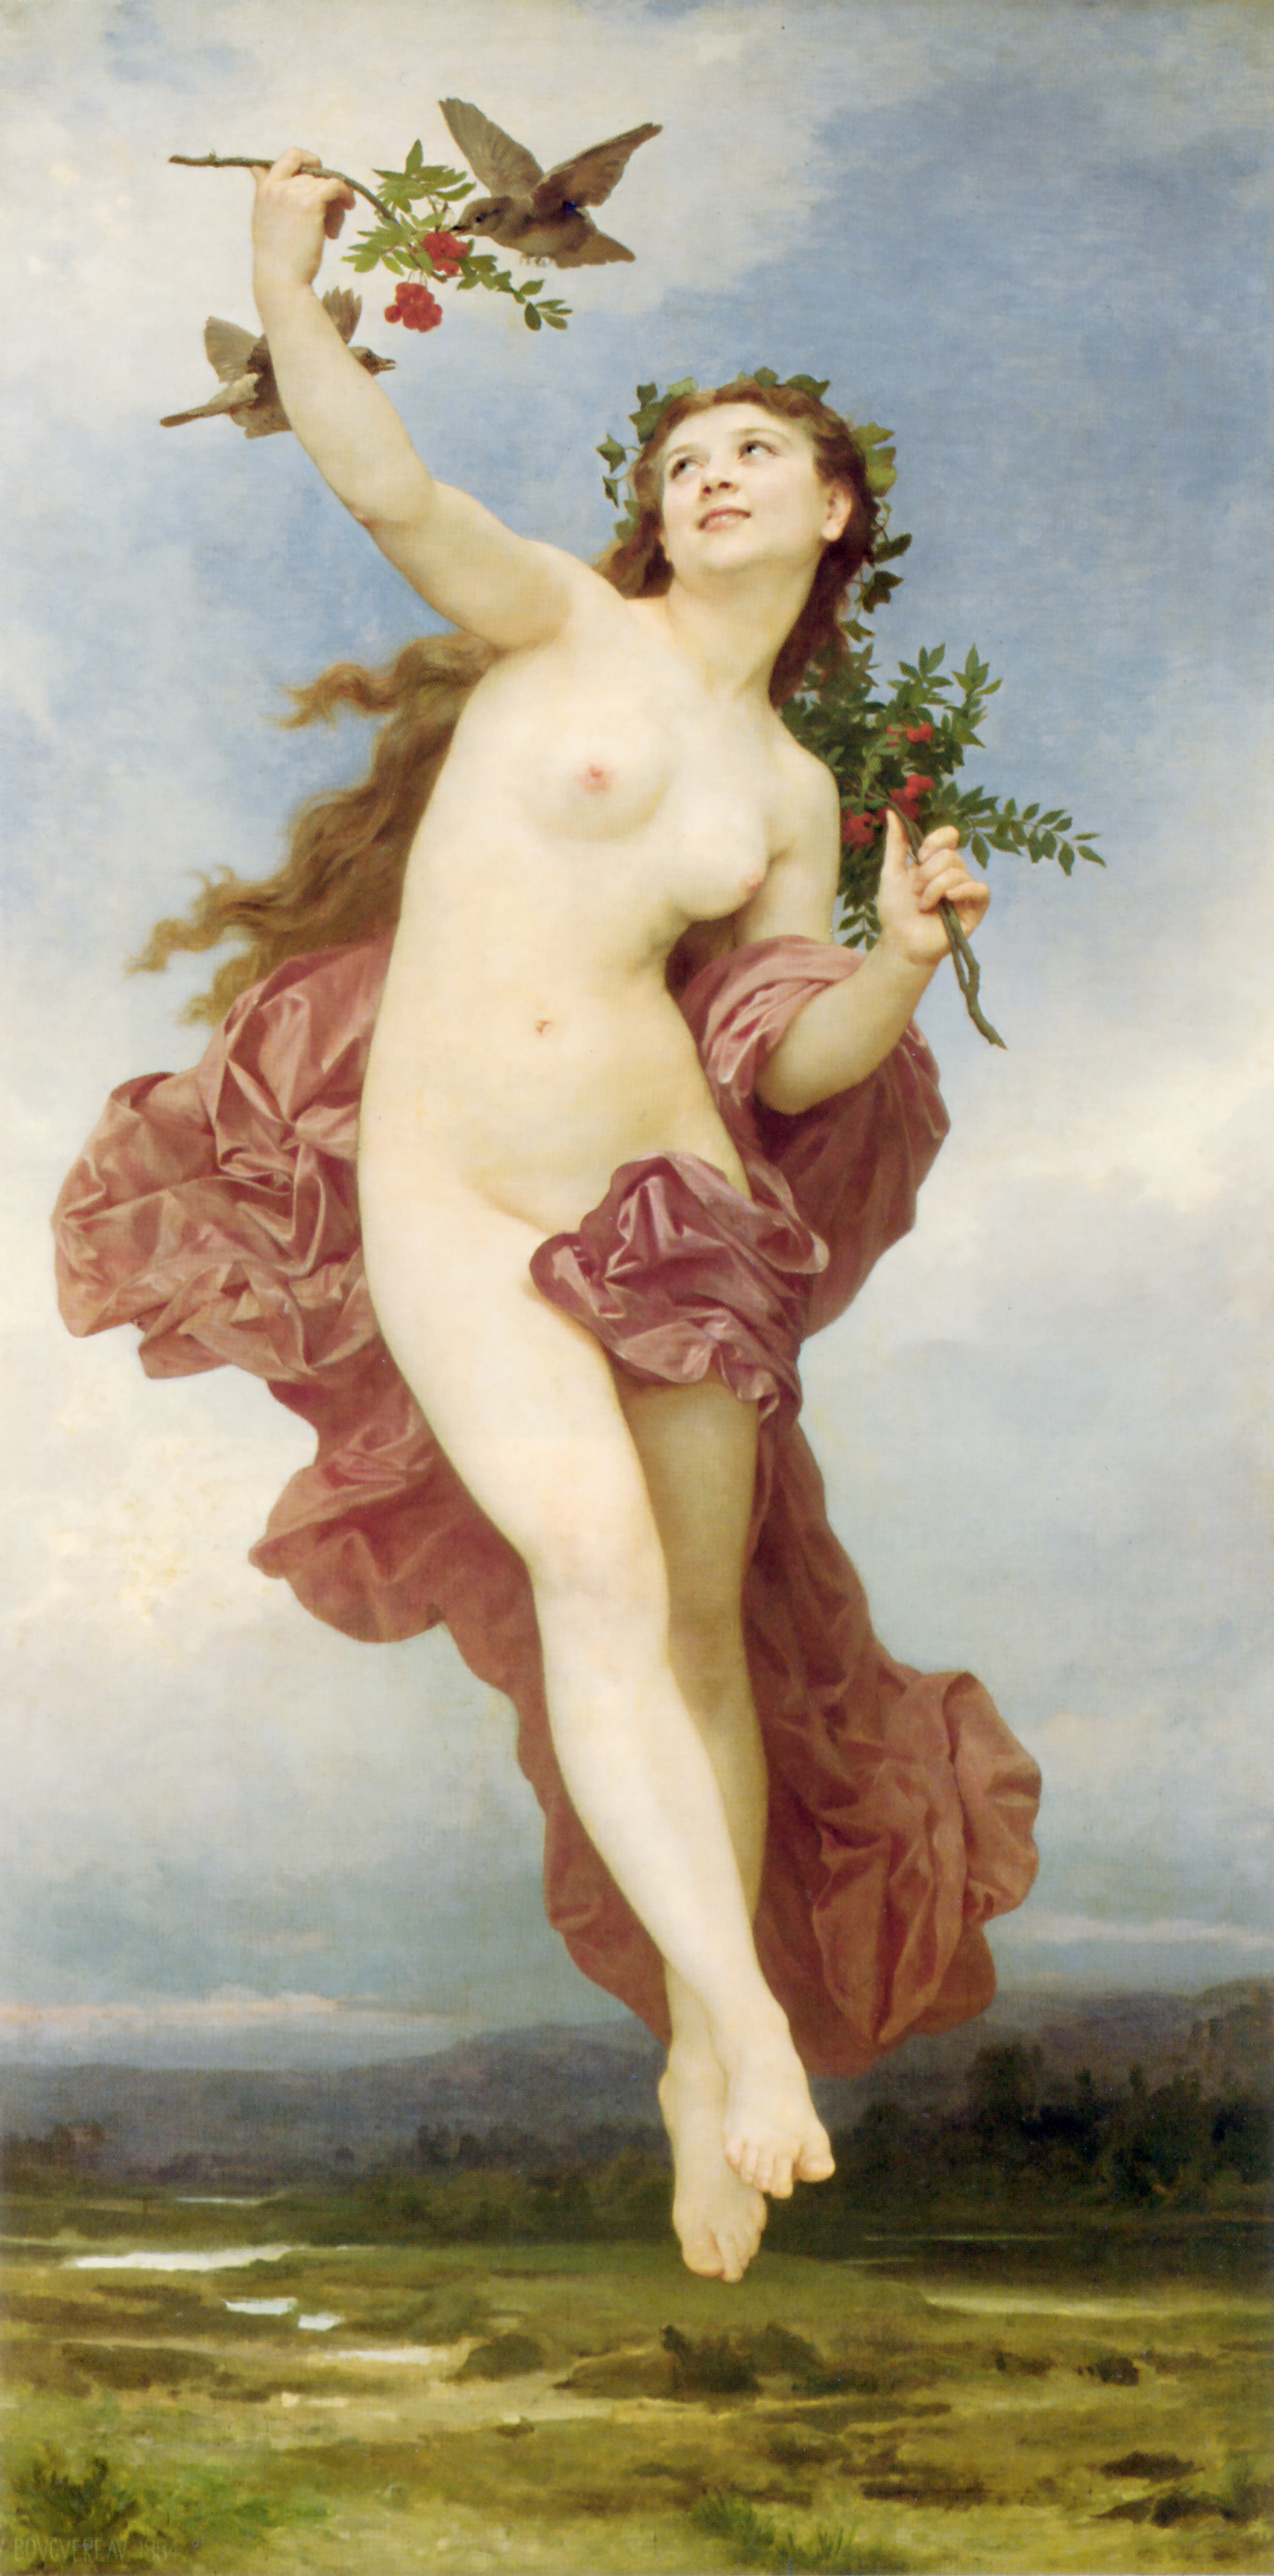 http://upload.wikimedia.org/wikipedia/commons/d/d3/William-Adolphe_Bouguereau_%281825-1905%29_-_Day_%281881%29.jpg